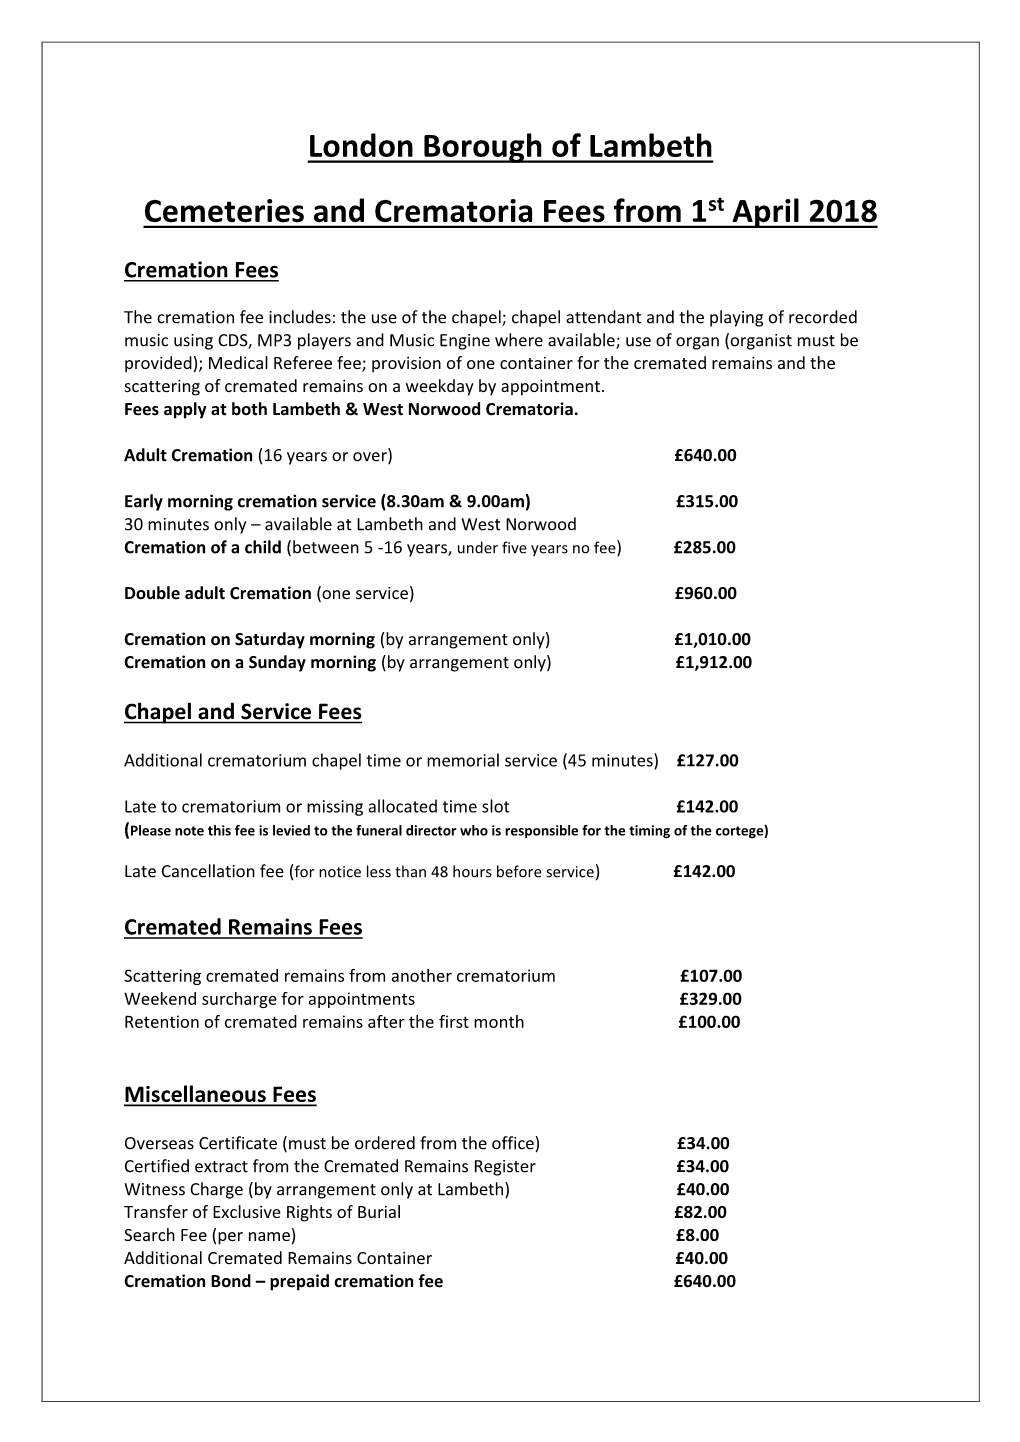 London Borough of Lambeth Cemeteries and Crematoria Fees from 1St April 2018